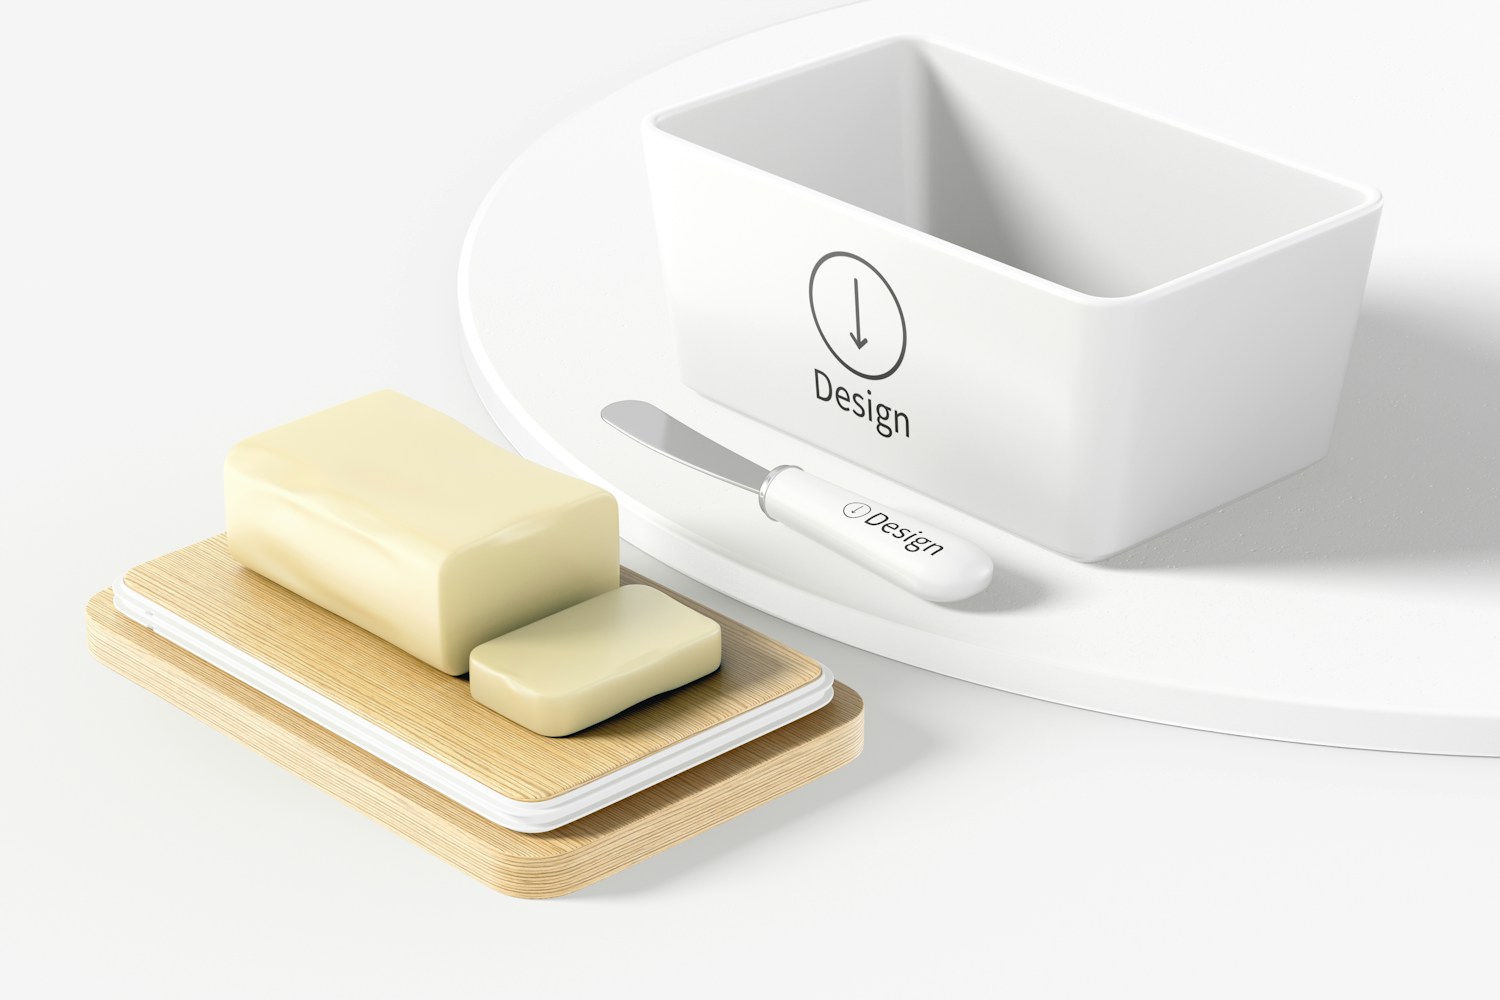 Ceramic Butter Dish with Bamboo Lid Mockup, Perspective